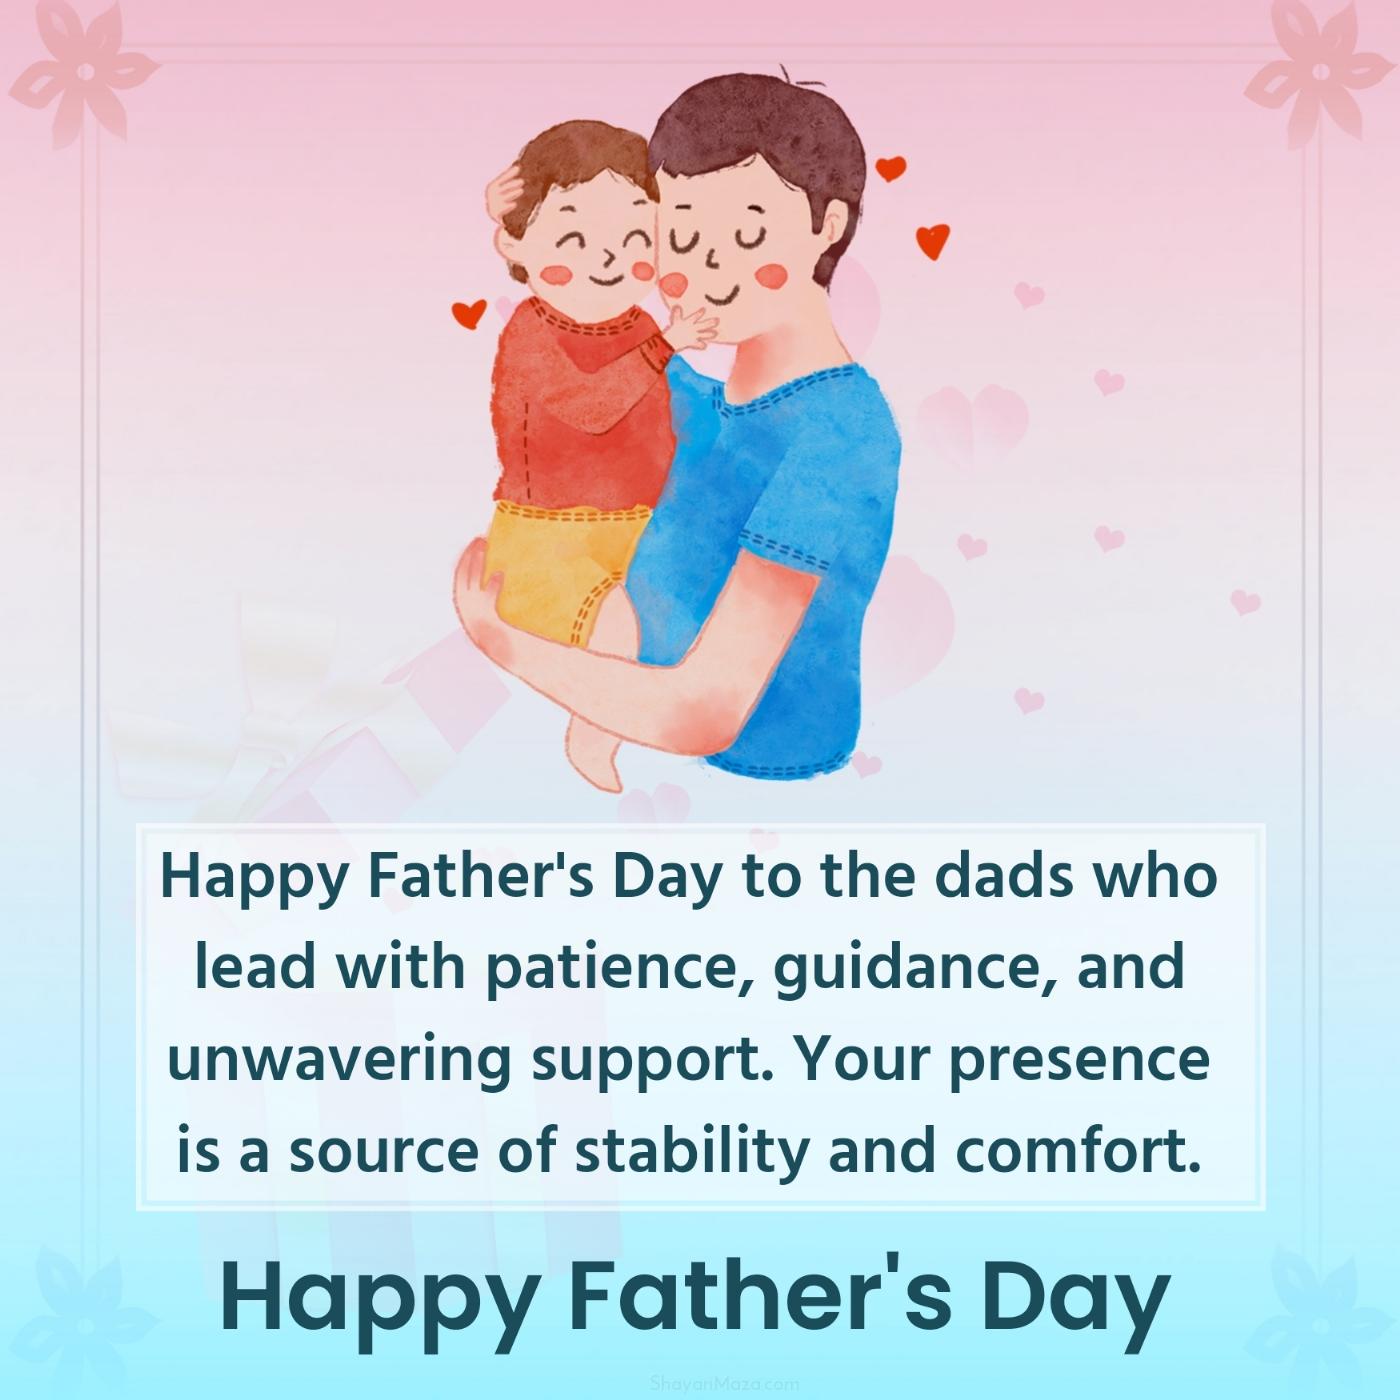 Happy Father's Day to the dads who lead with patience